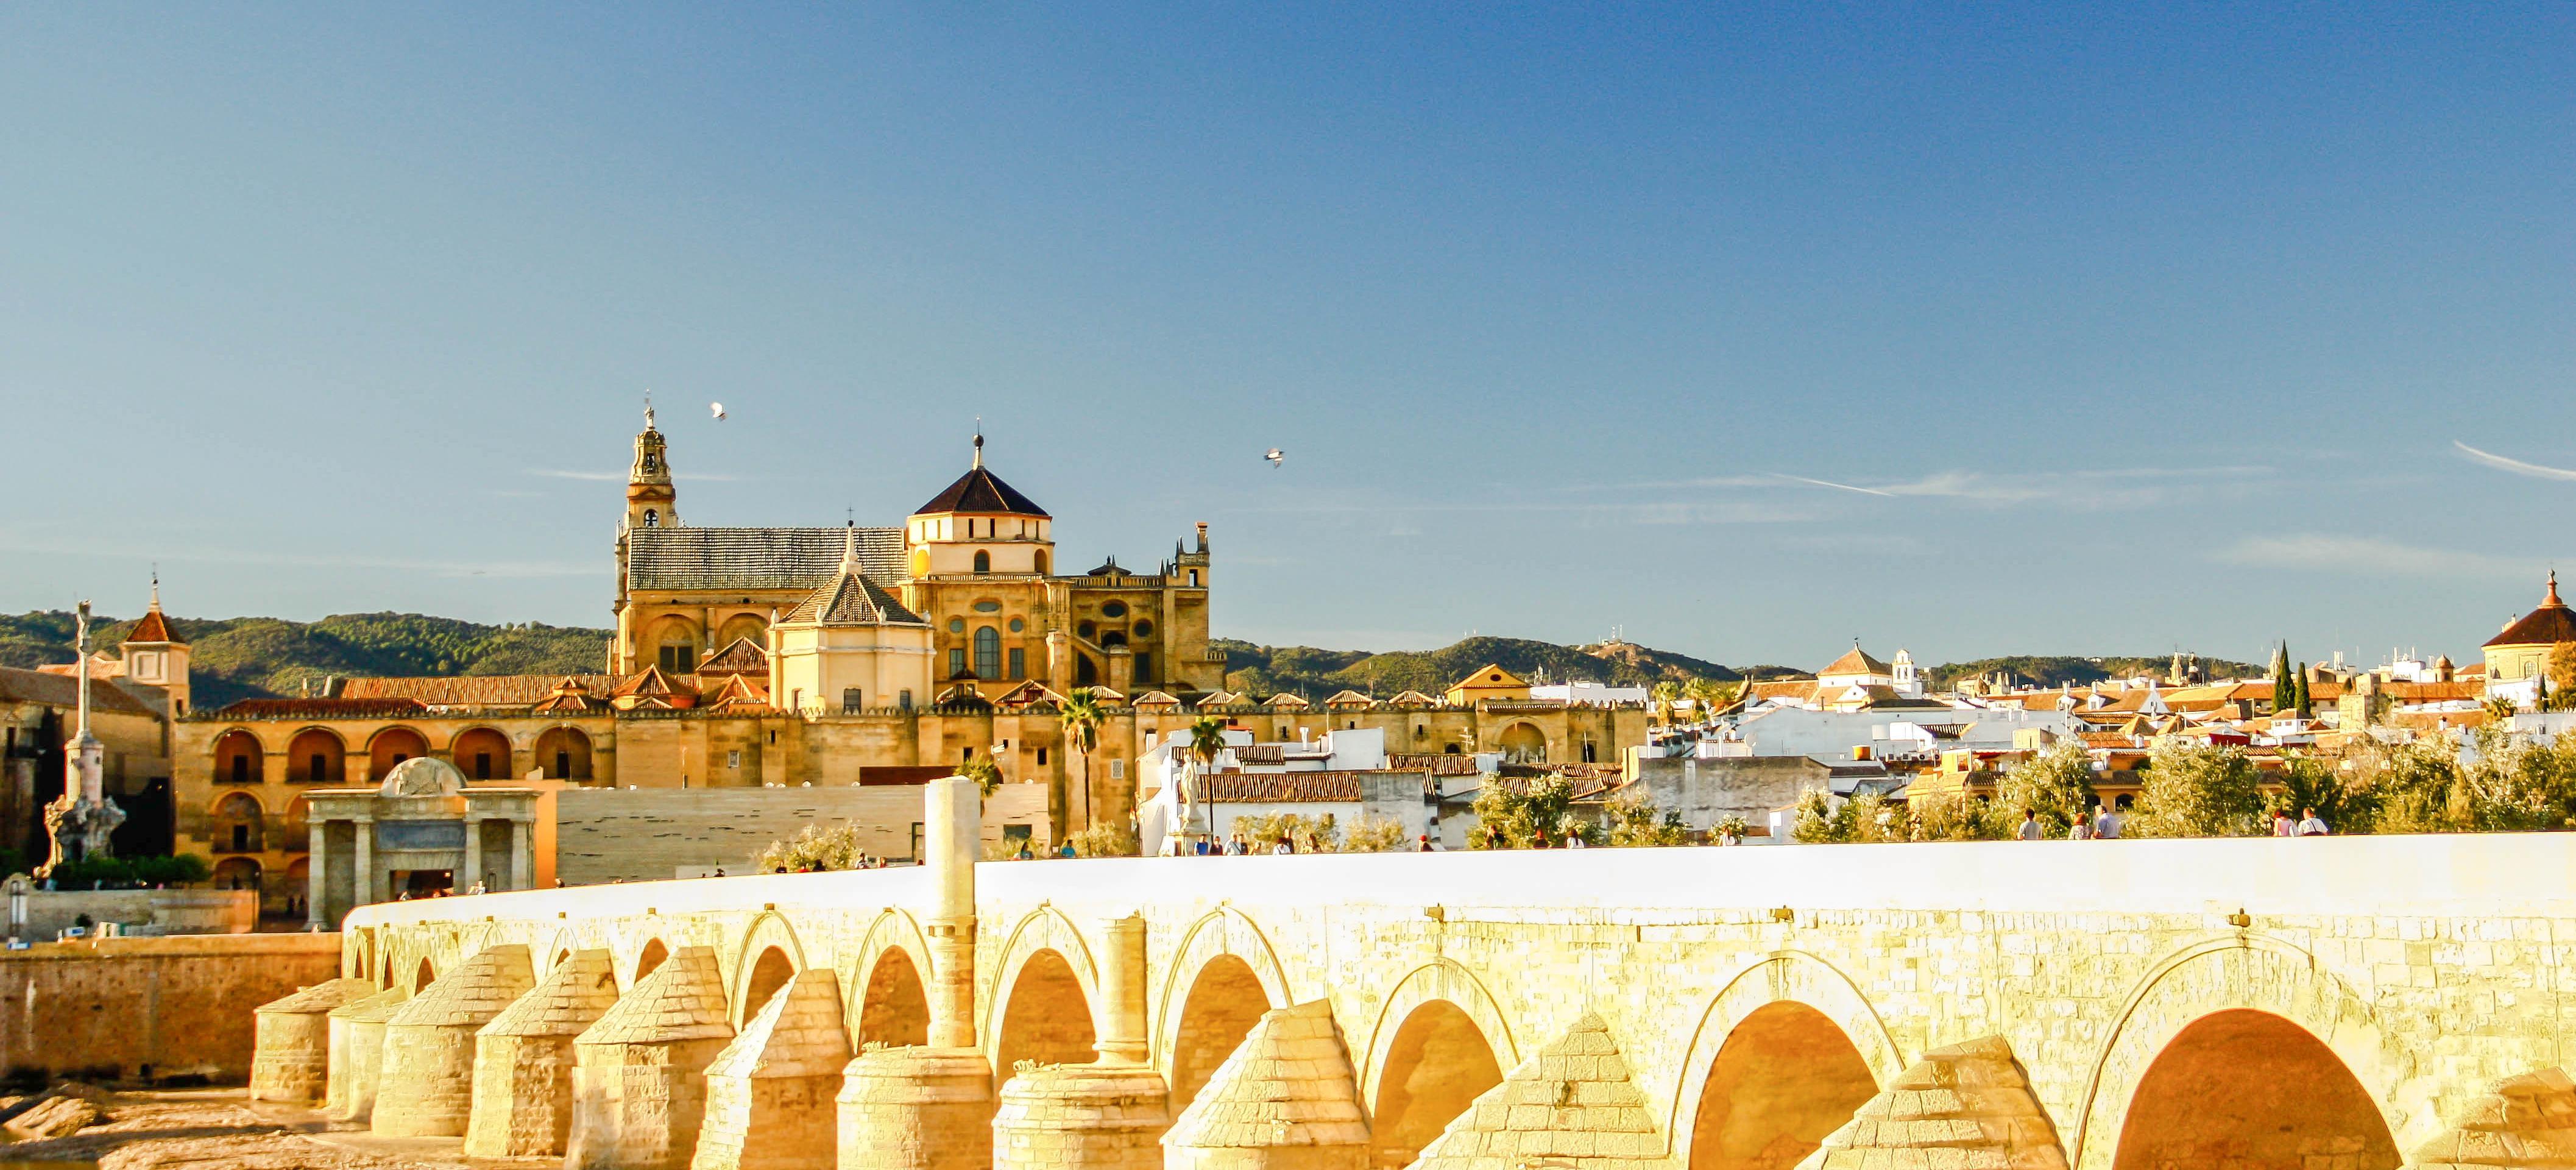 Guided Excursion to the Historic City of Cordoba – Leaving from Granada